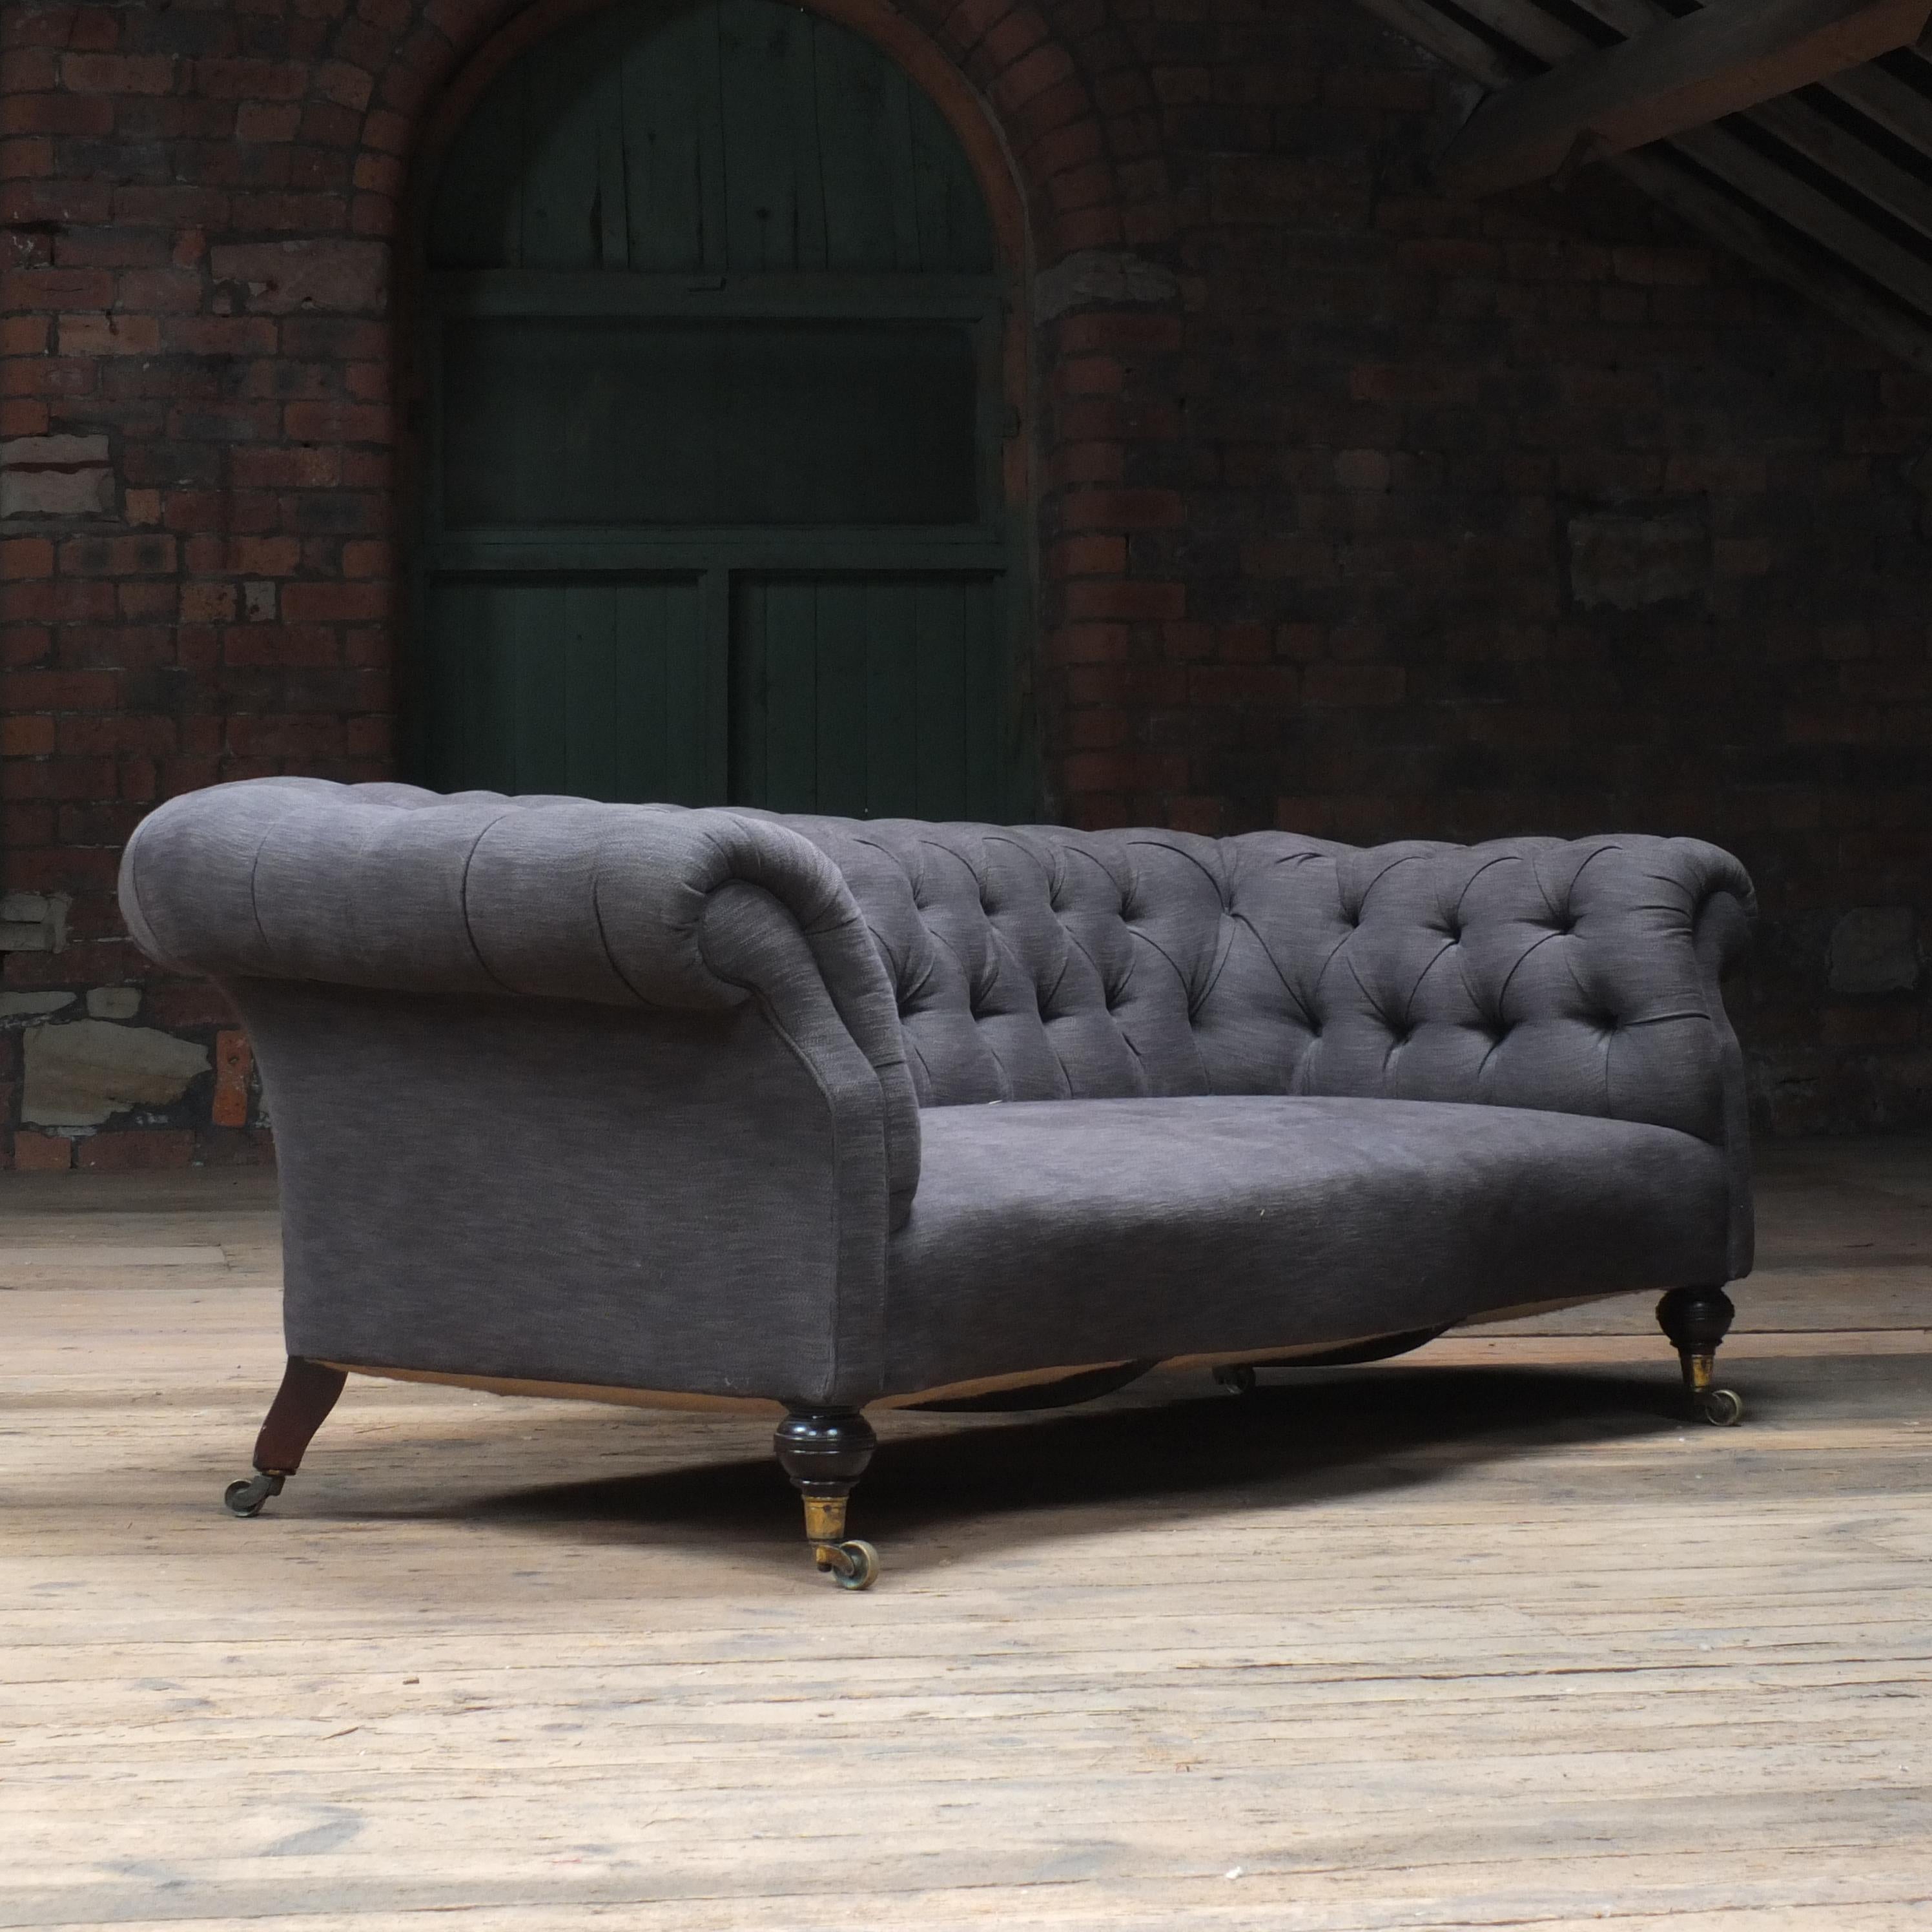 Victorian Antique English Chesterfield Sofa by Howard and Sons c1880 (INC UPHOLSTERY)